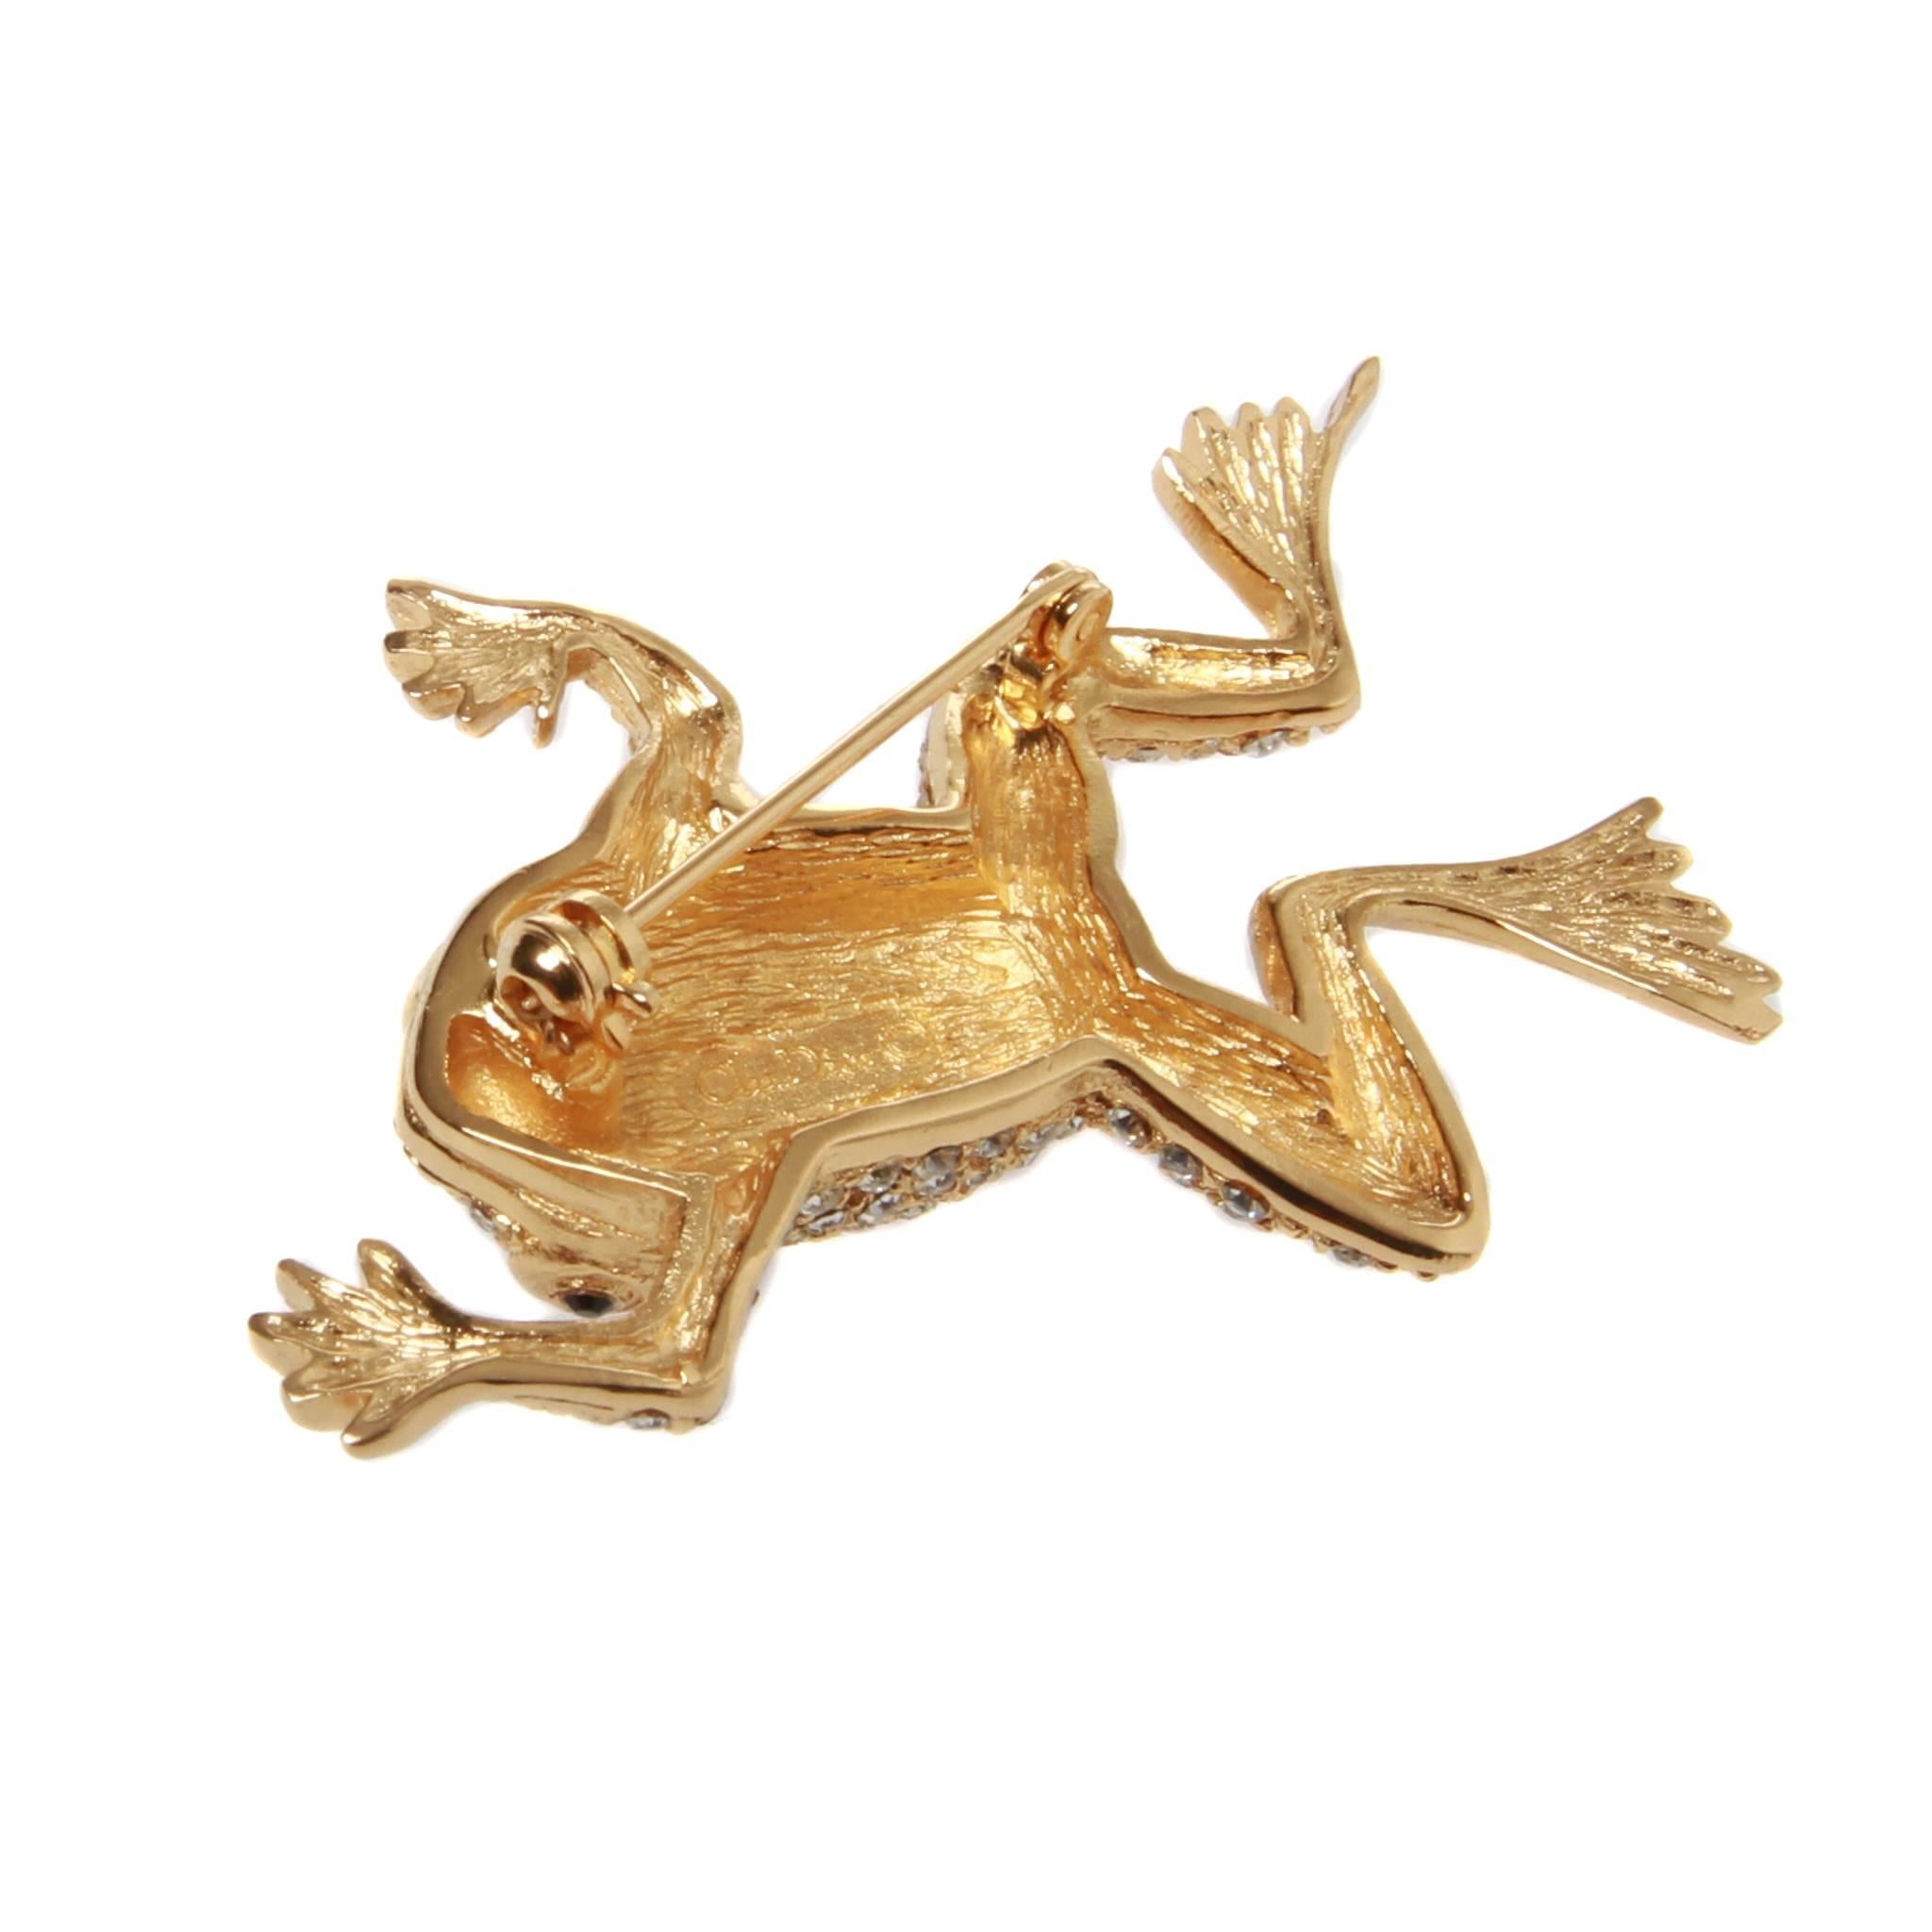 	
Vintage signed Christian Dior gold tone and clear rhinestone crystal frog brooch. 
Made by Henkel & Grosse on license for Christian Dior in the 1980's this lovely brooch depicts a swimming frog.
With polished gold tone webbed feet, the remainder